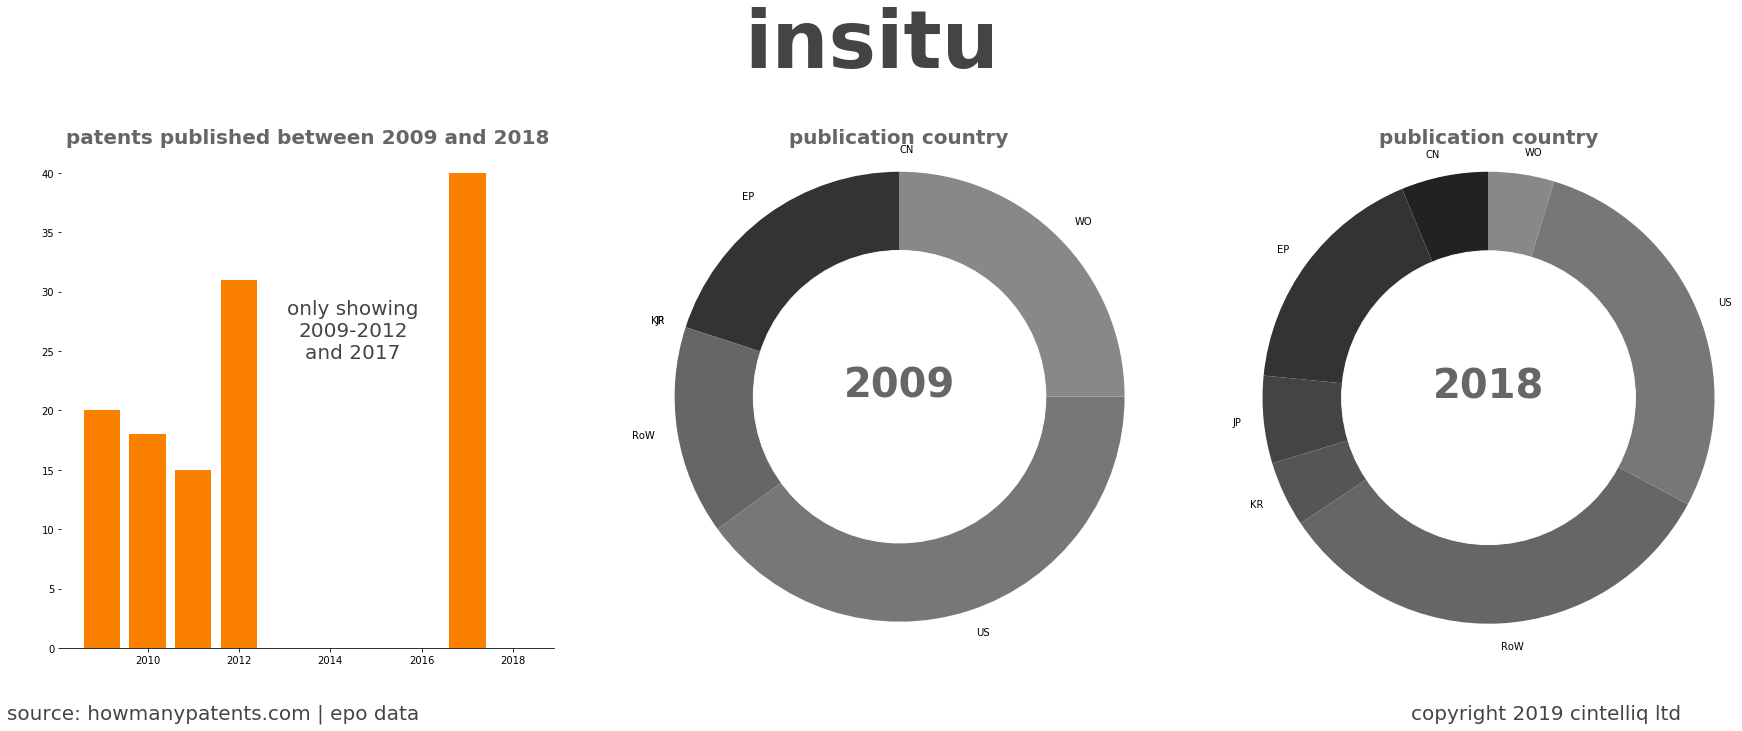 summary of patents for Insitu